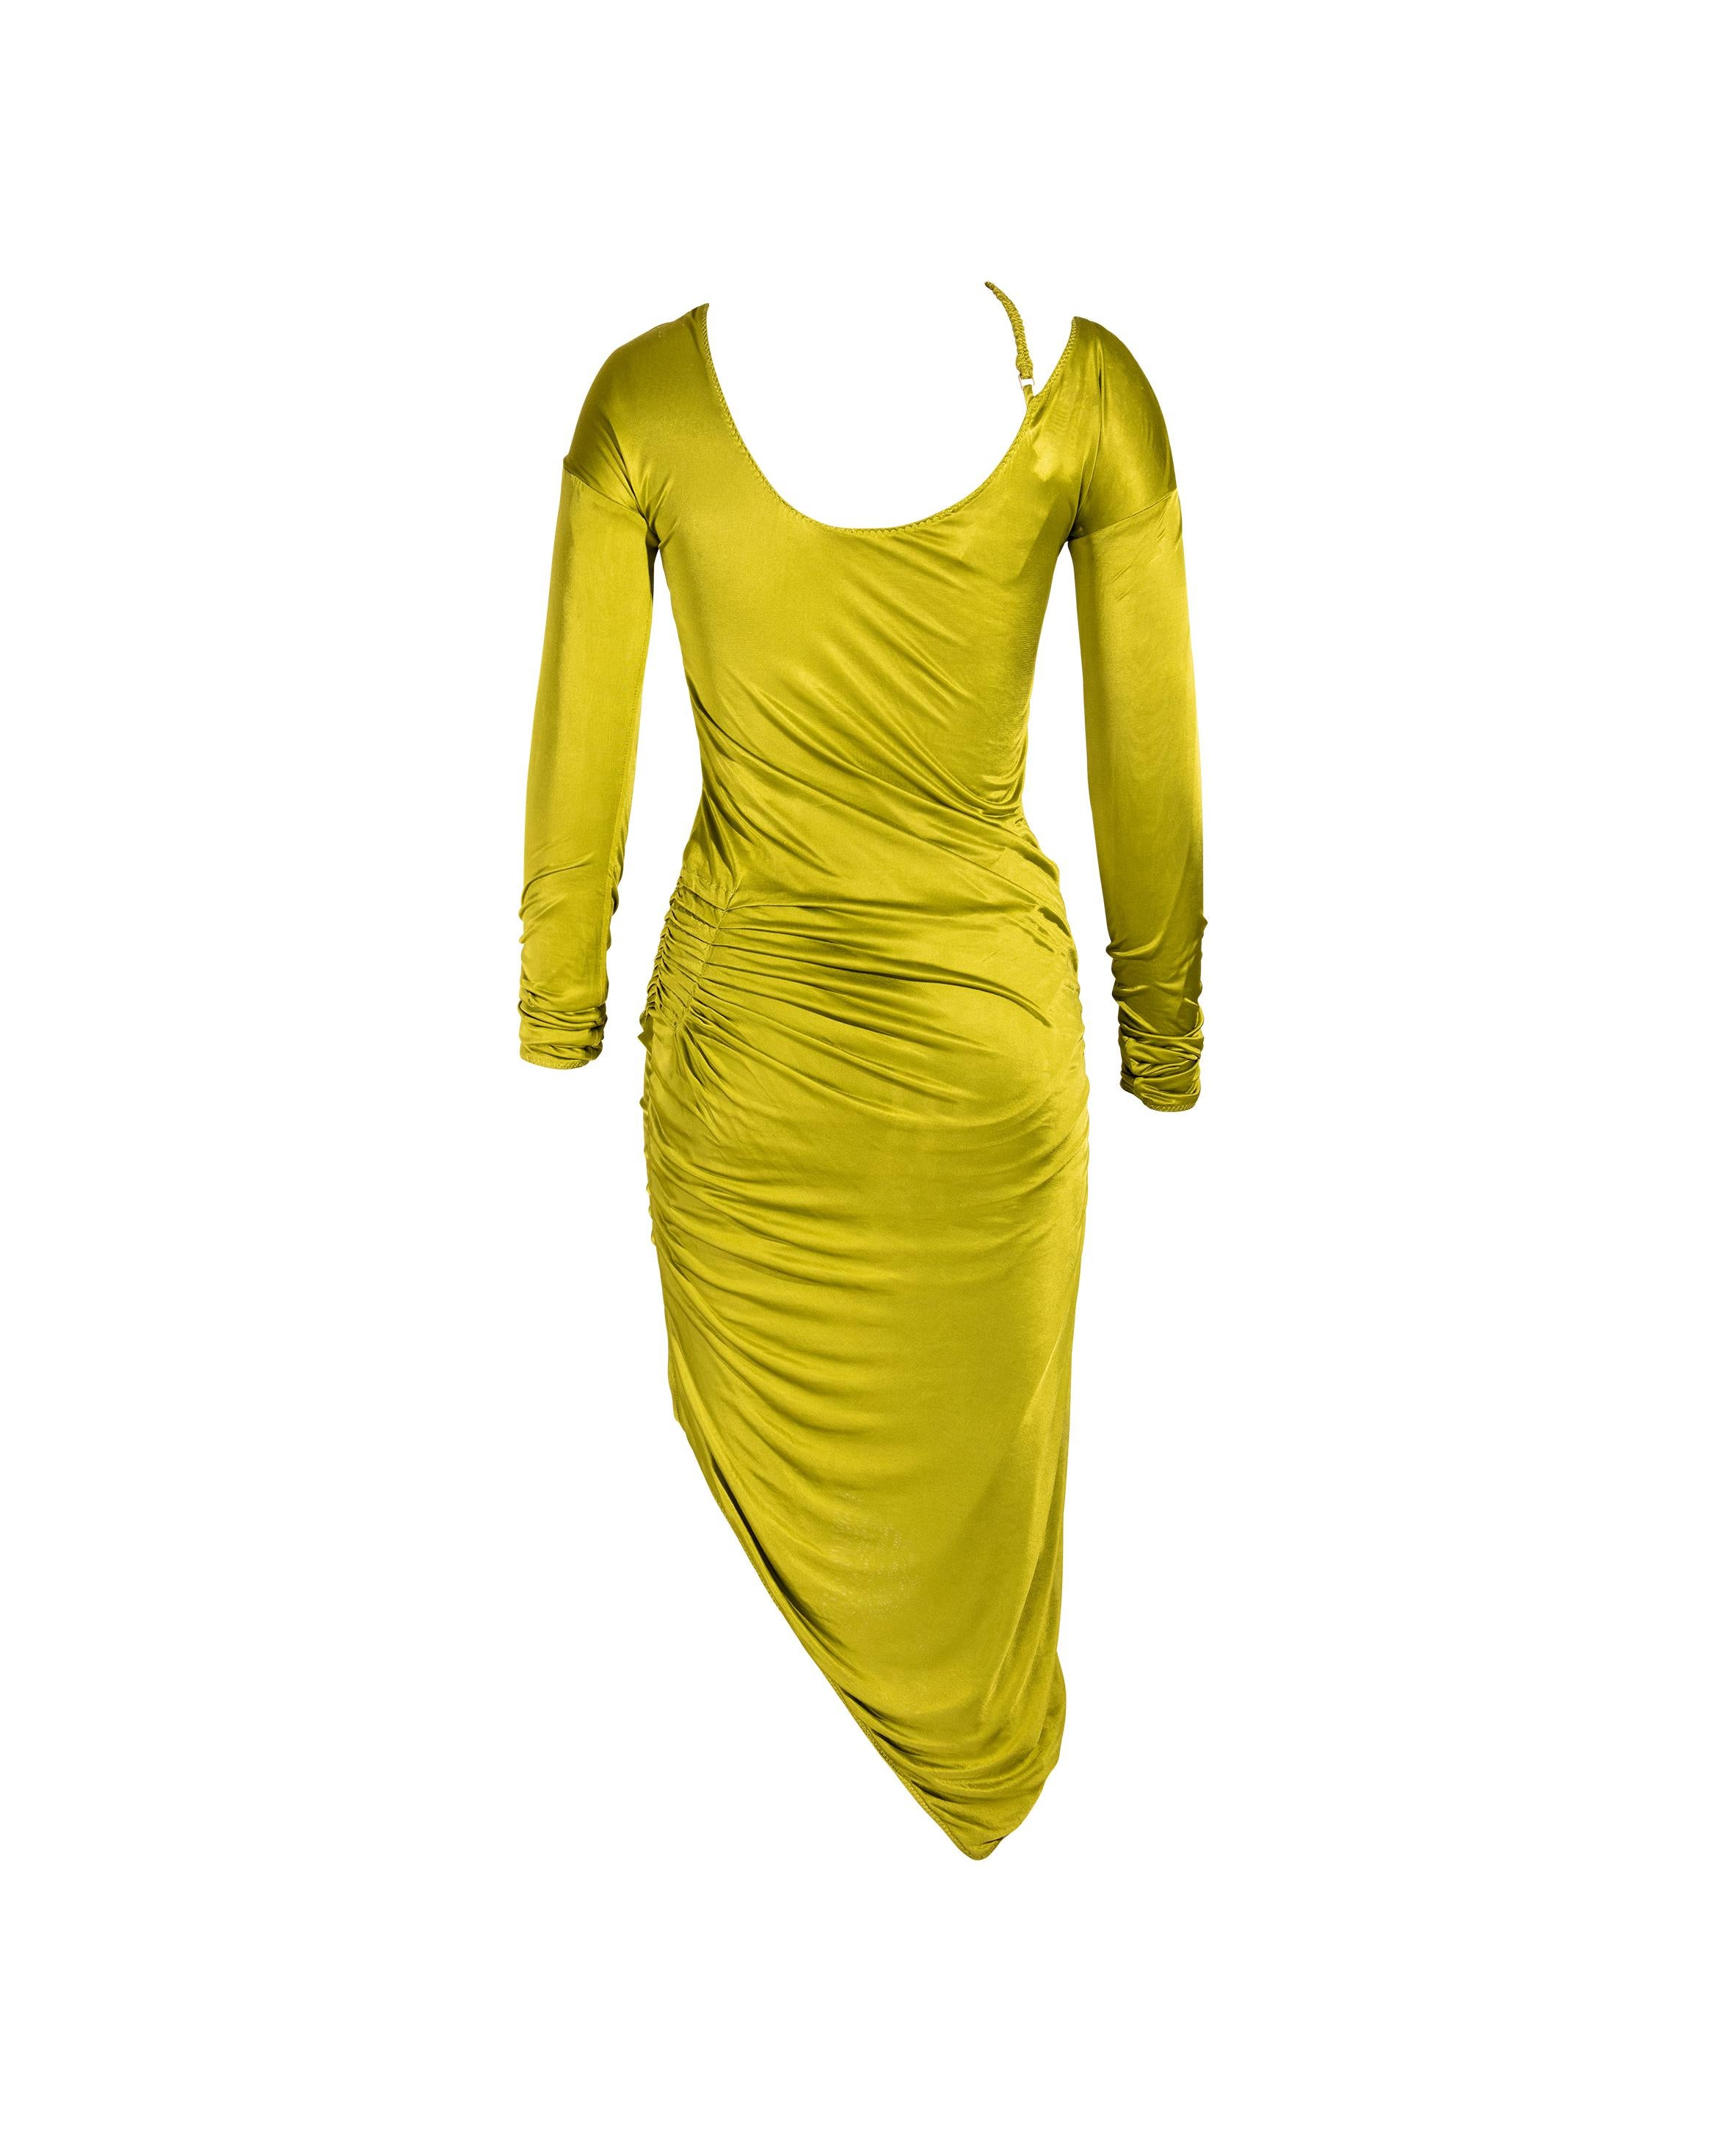 c. 2003 Gucci by Tom Ford Asymmetrical Chartreuse Long Sleeve Dress In Good Condition In North Hollywood, CA